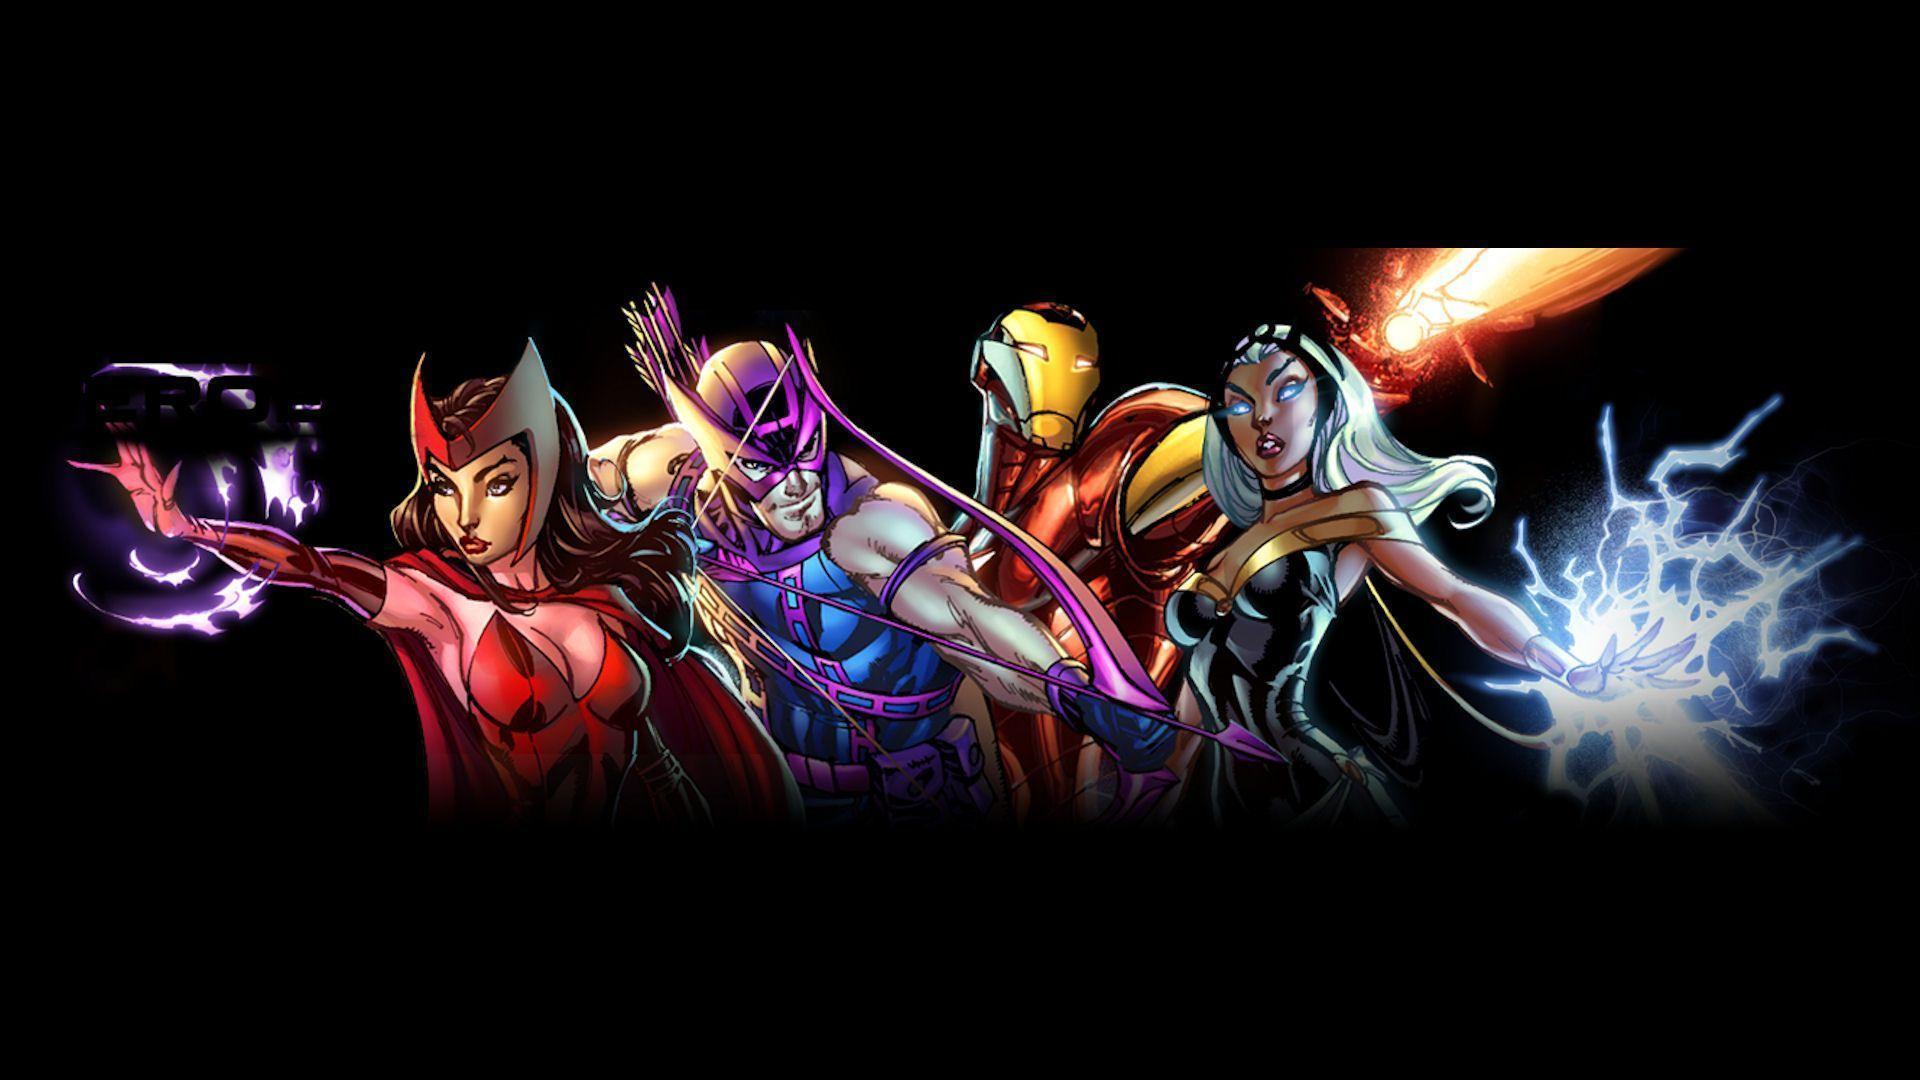 Gallery For gt Marvel Heroes Game Wallpaper